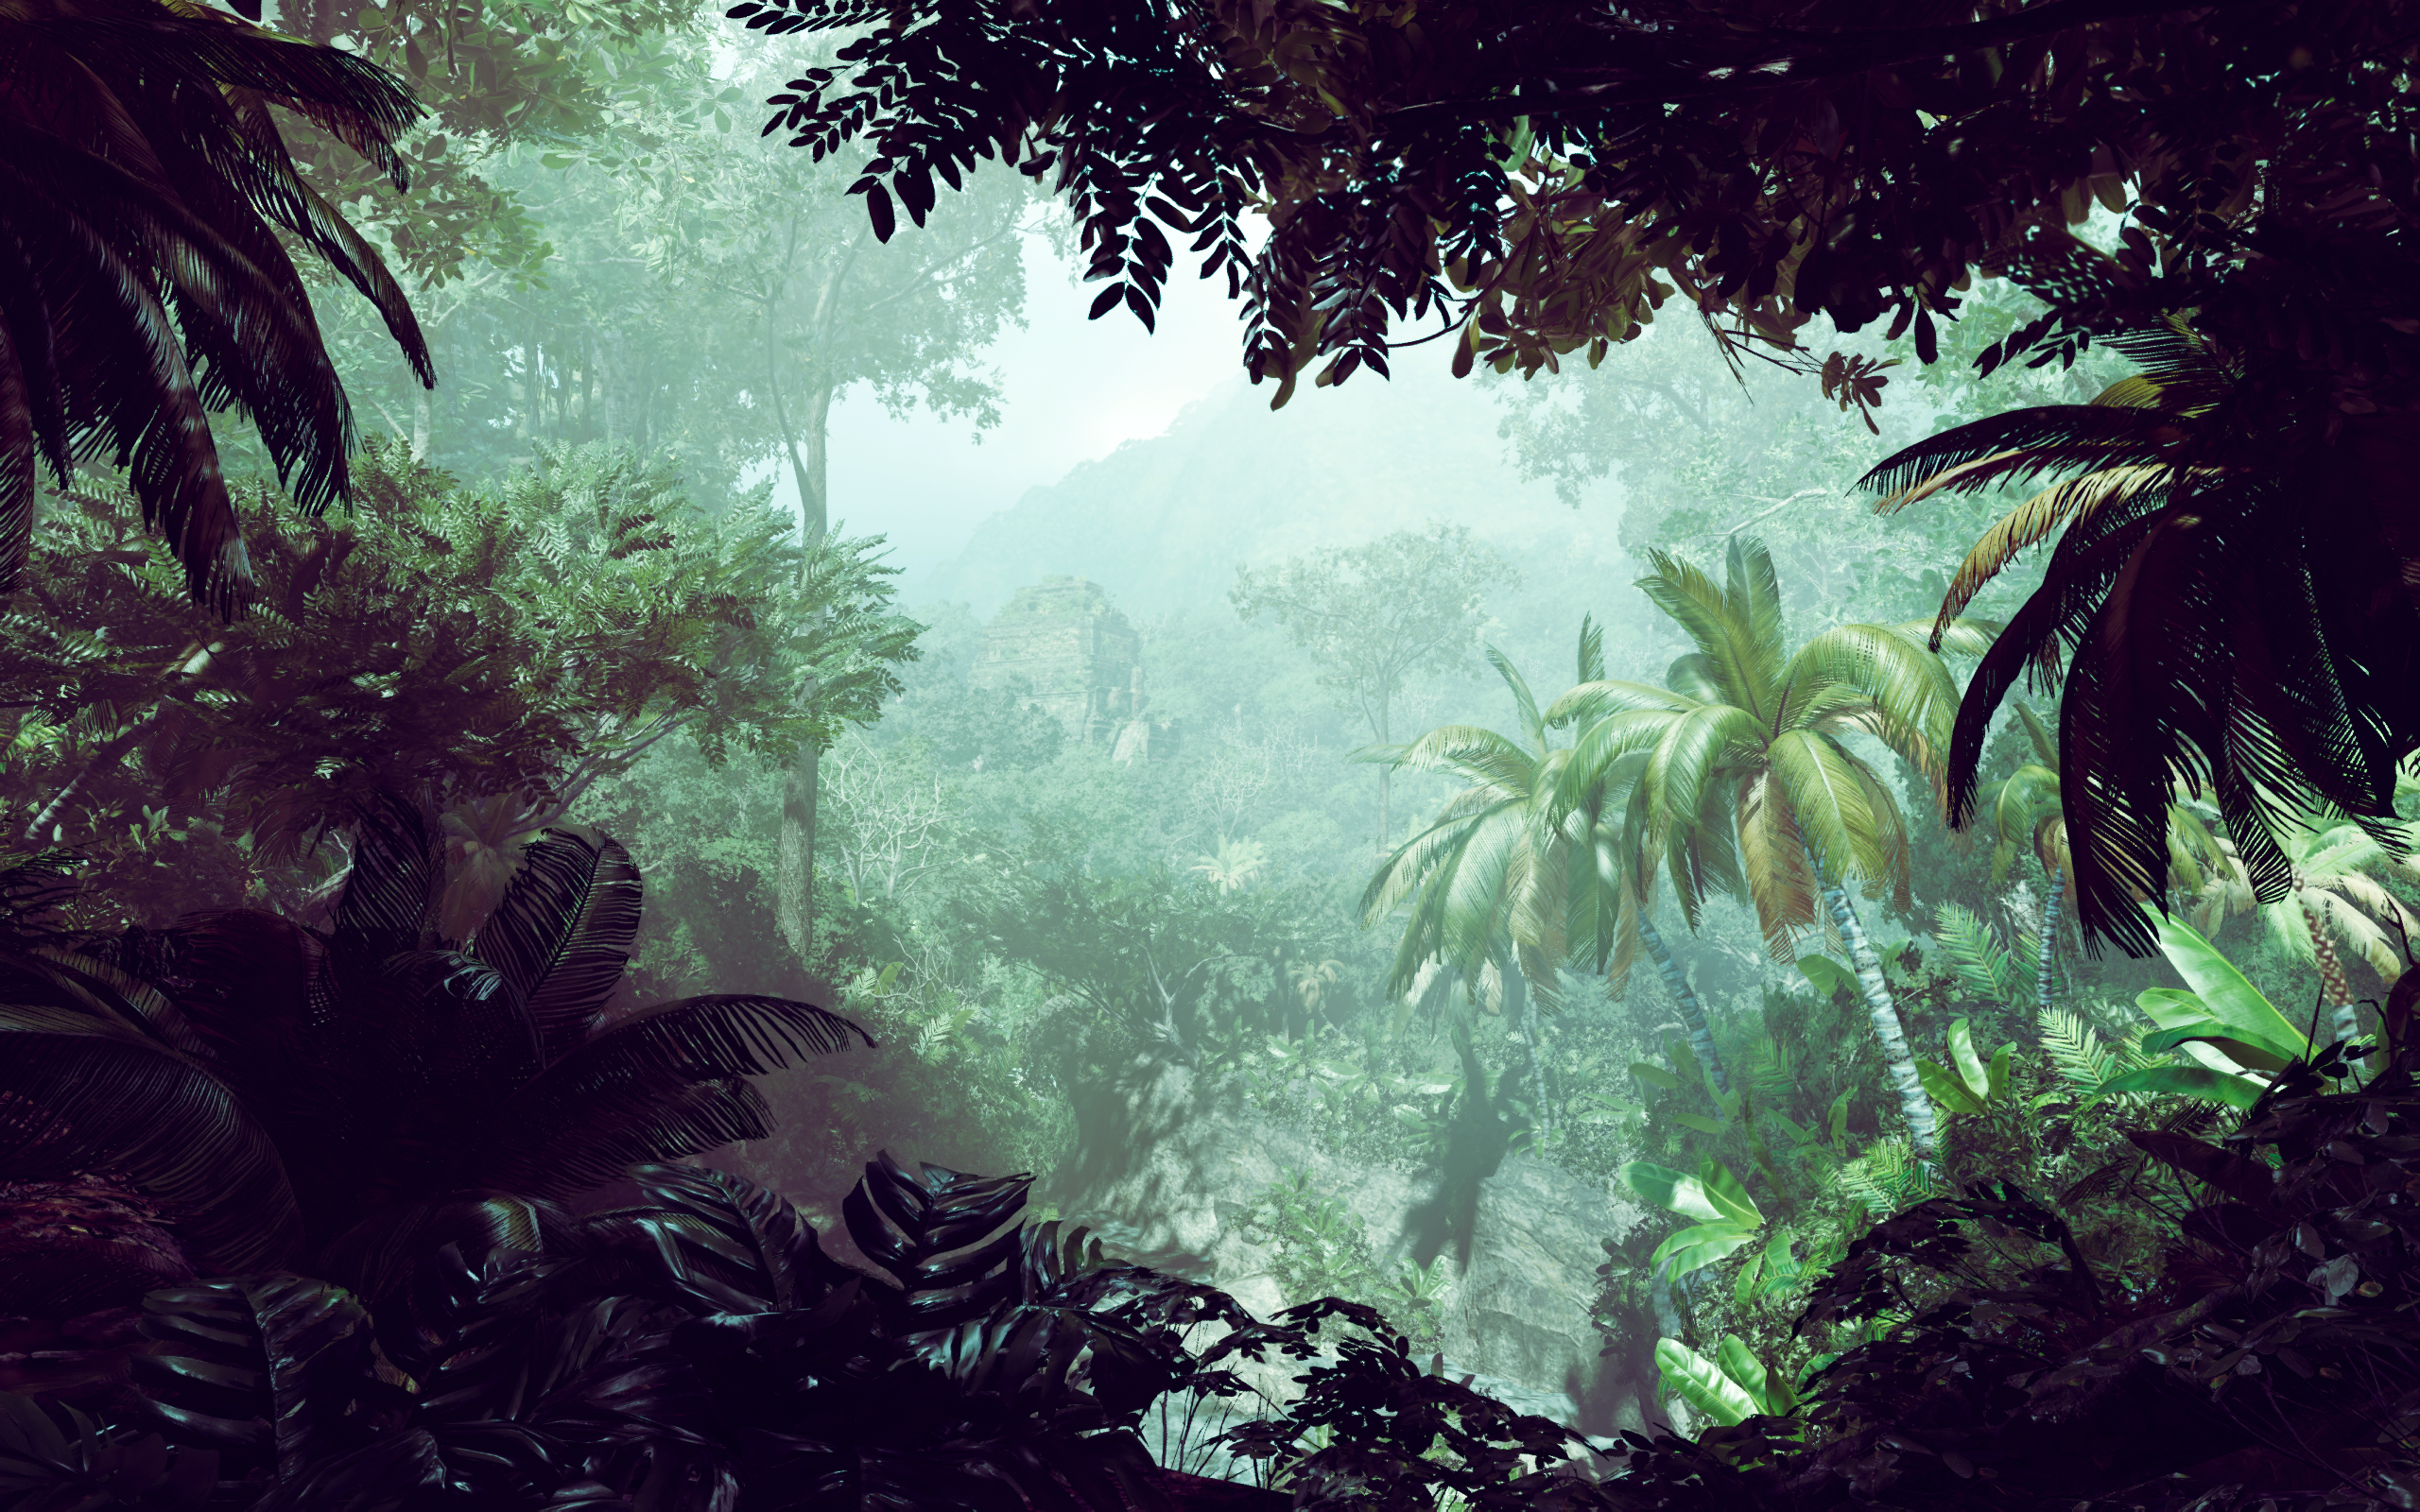 Tomb Raider 505 Games Video Games Digital Art Palm Trees Forest Nature 2560x1600